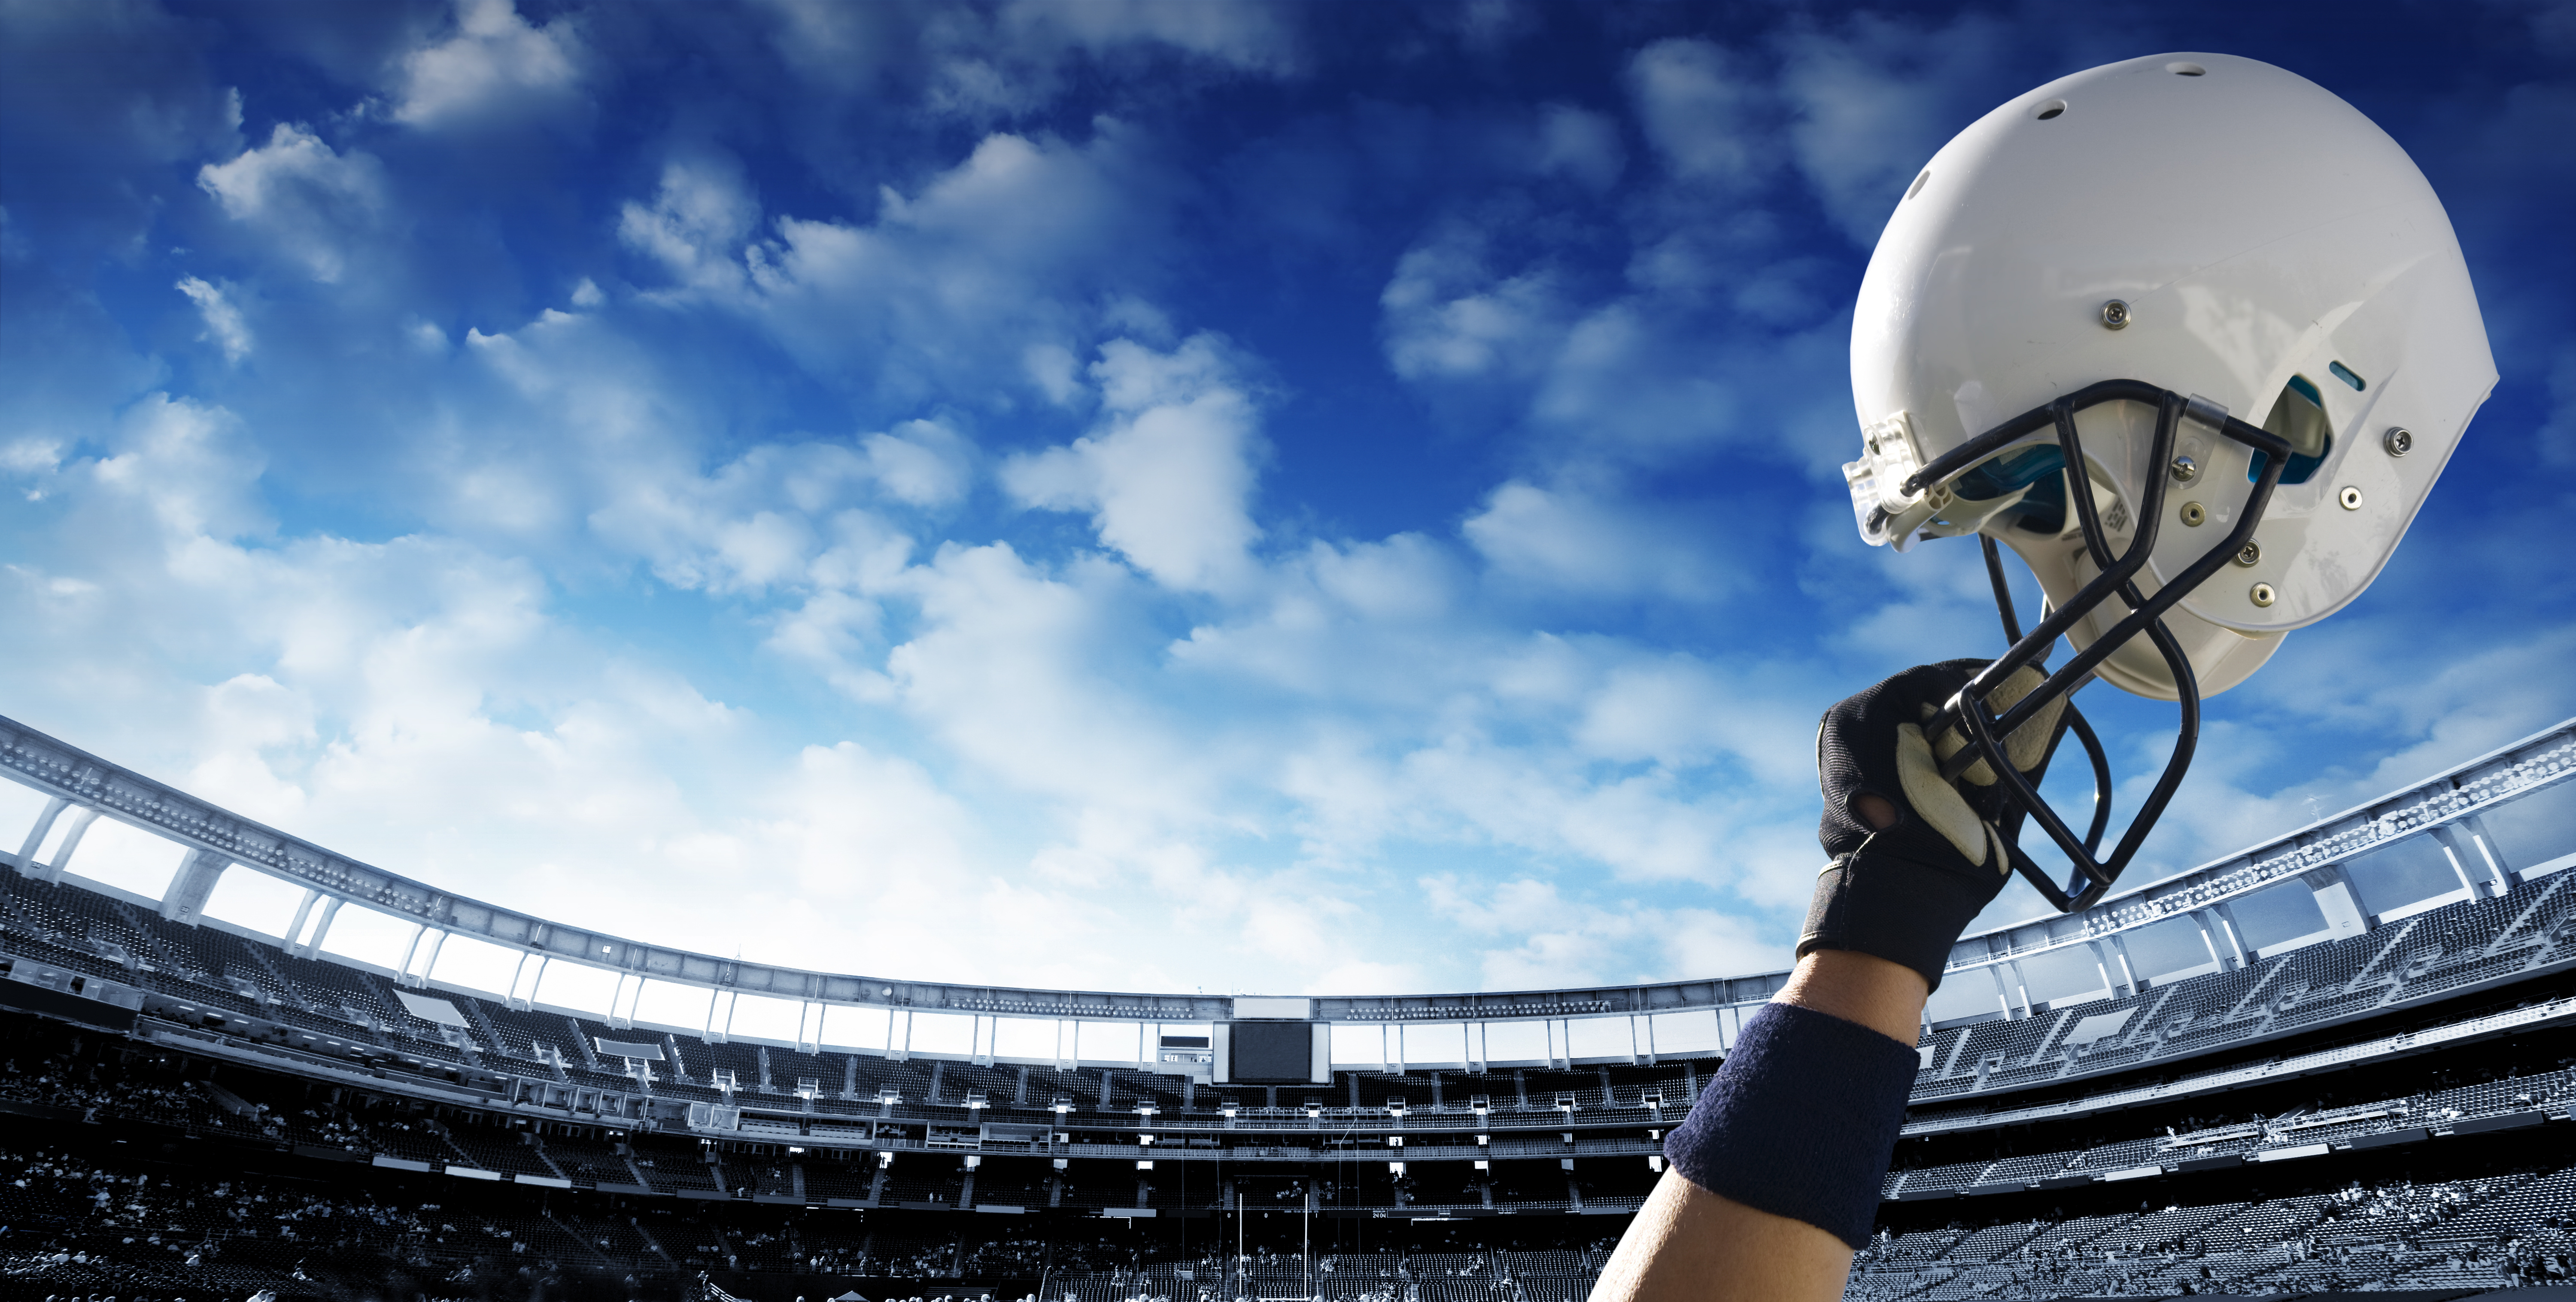 Winning the Game of Life and How One Super Bowl Can Teach Us Volumes